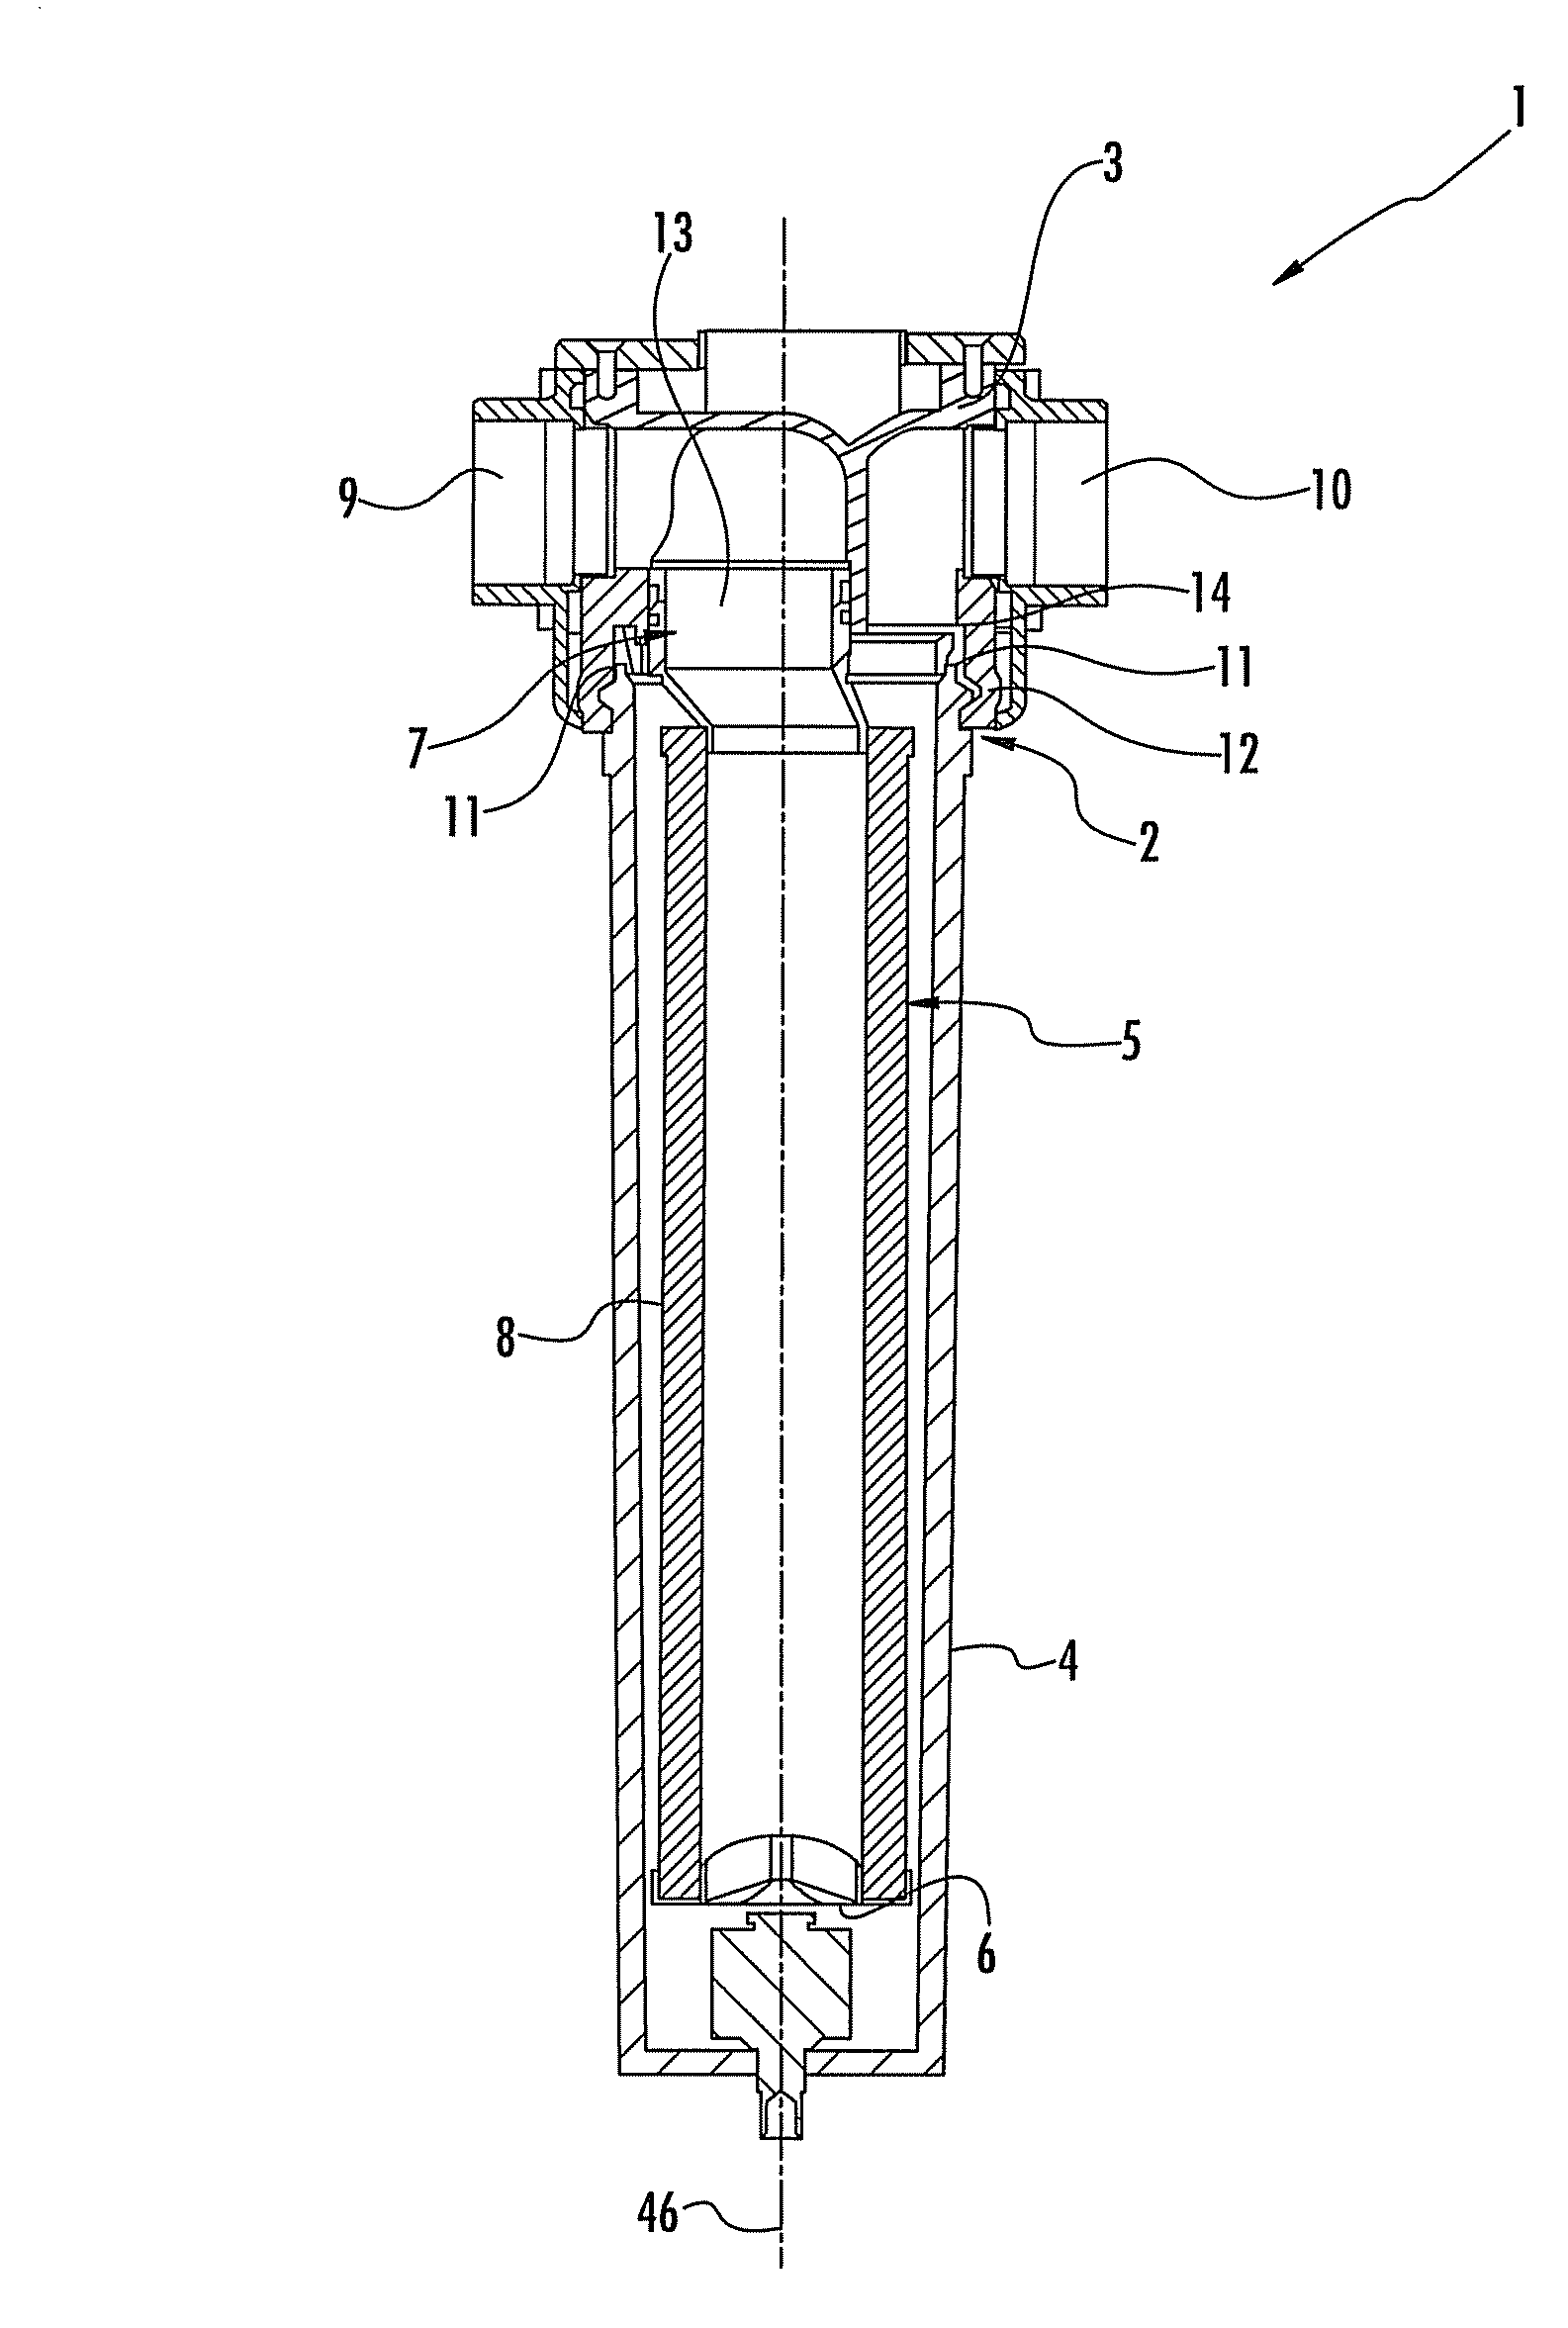 Filter element and compressed air filter for separating foreign matter from a compressed air stream